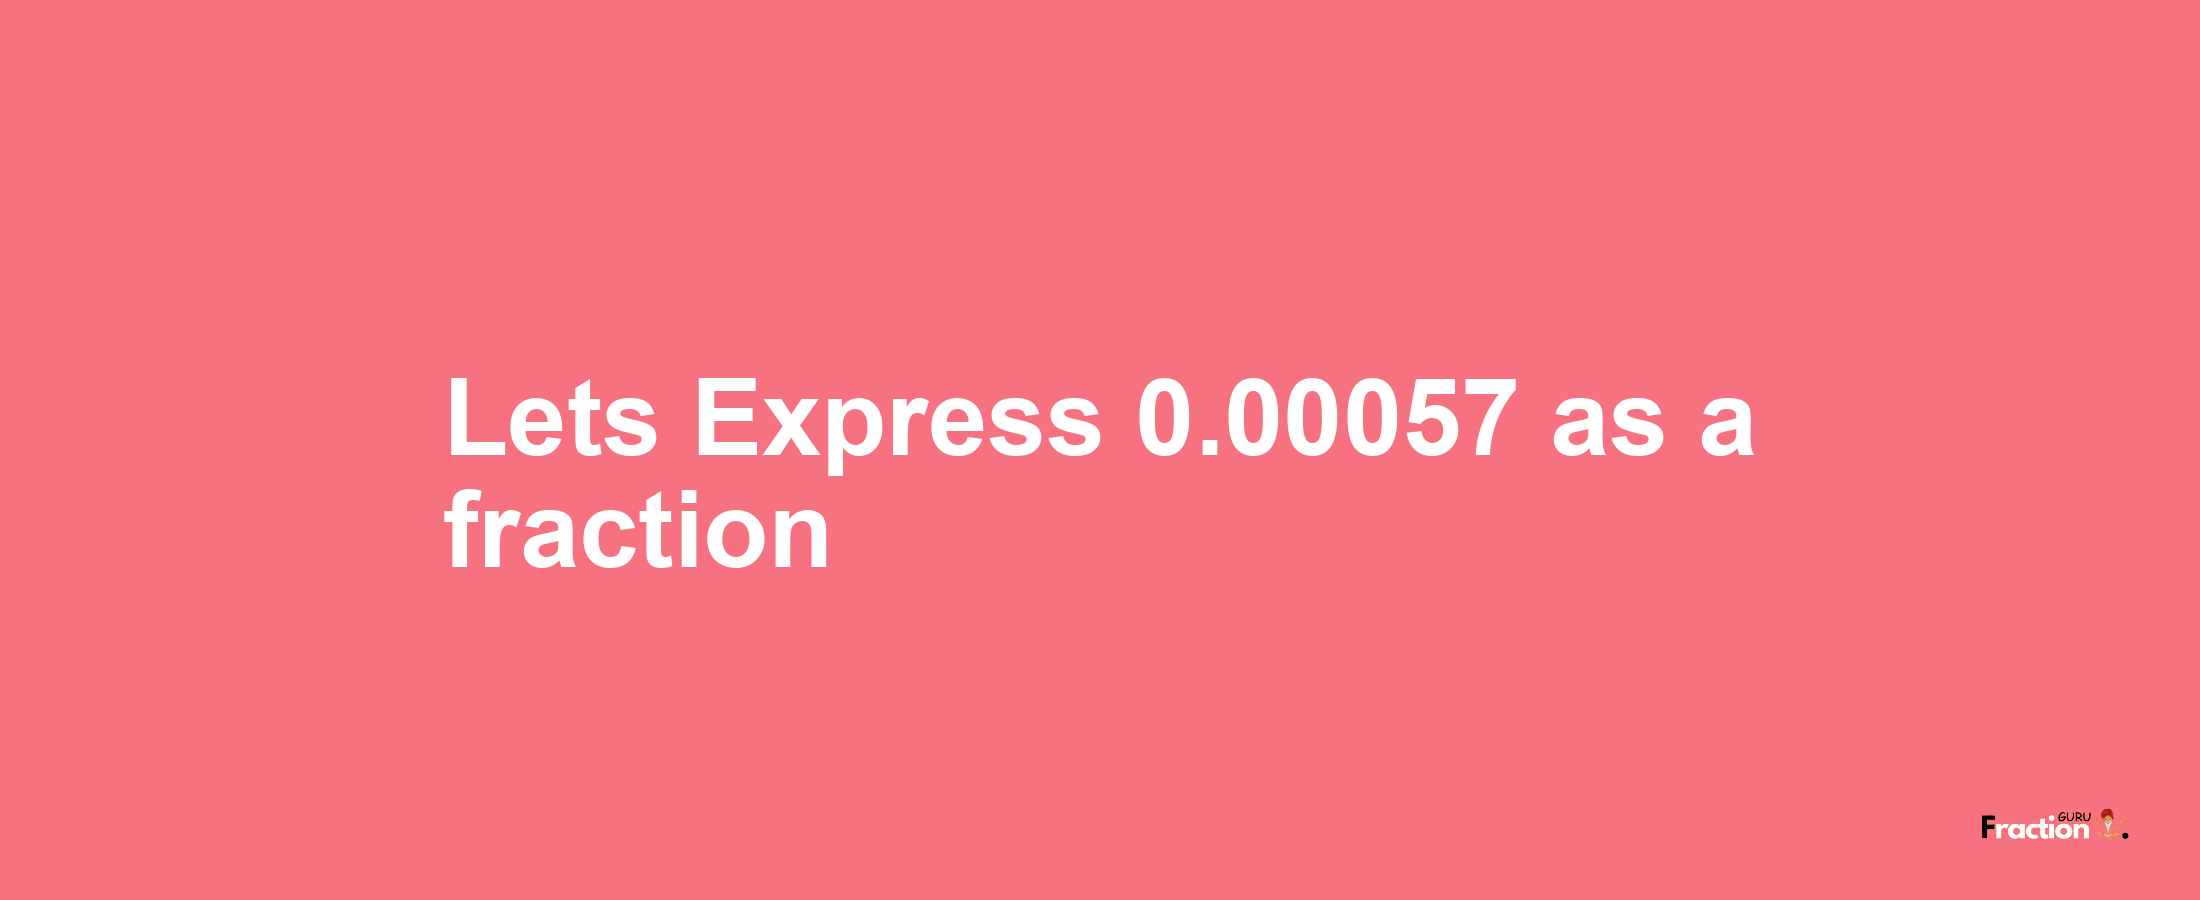 Lets Express 0.00057 as afraction